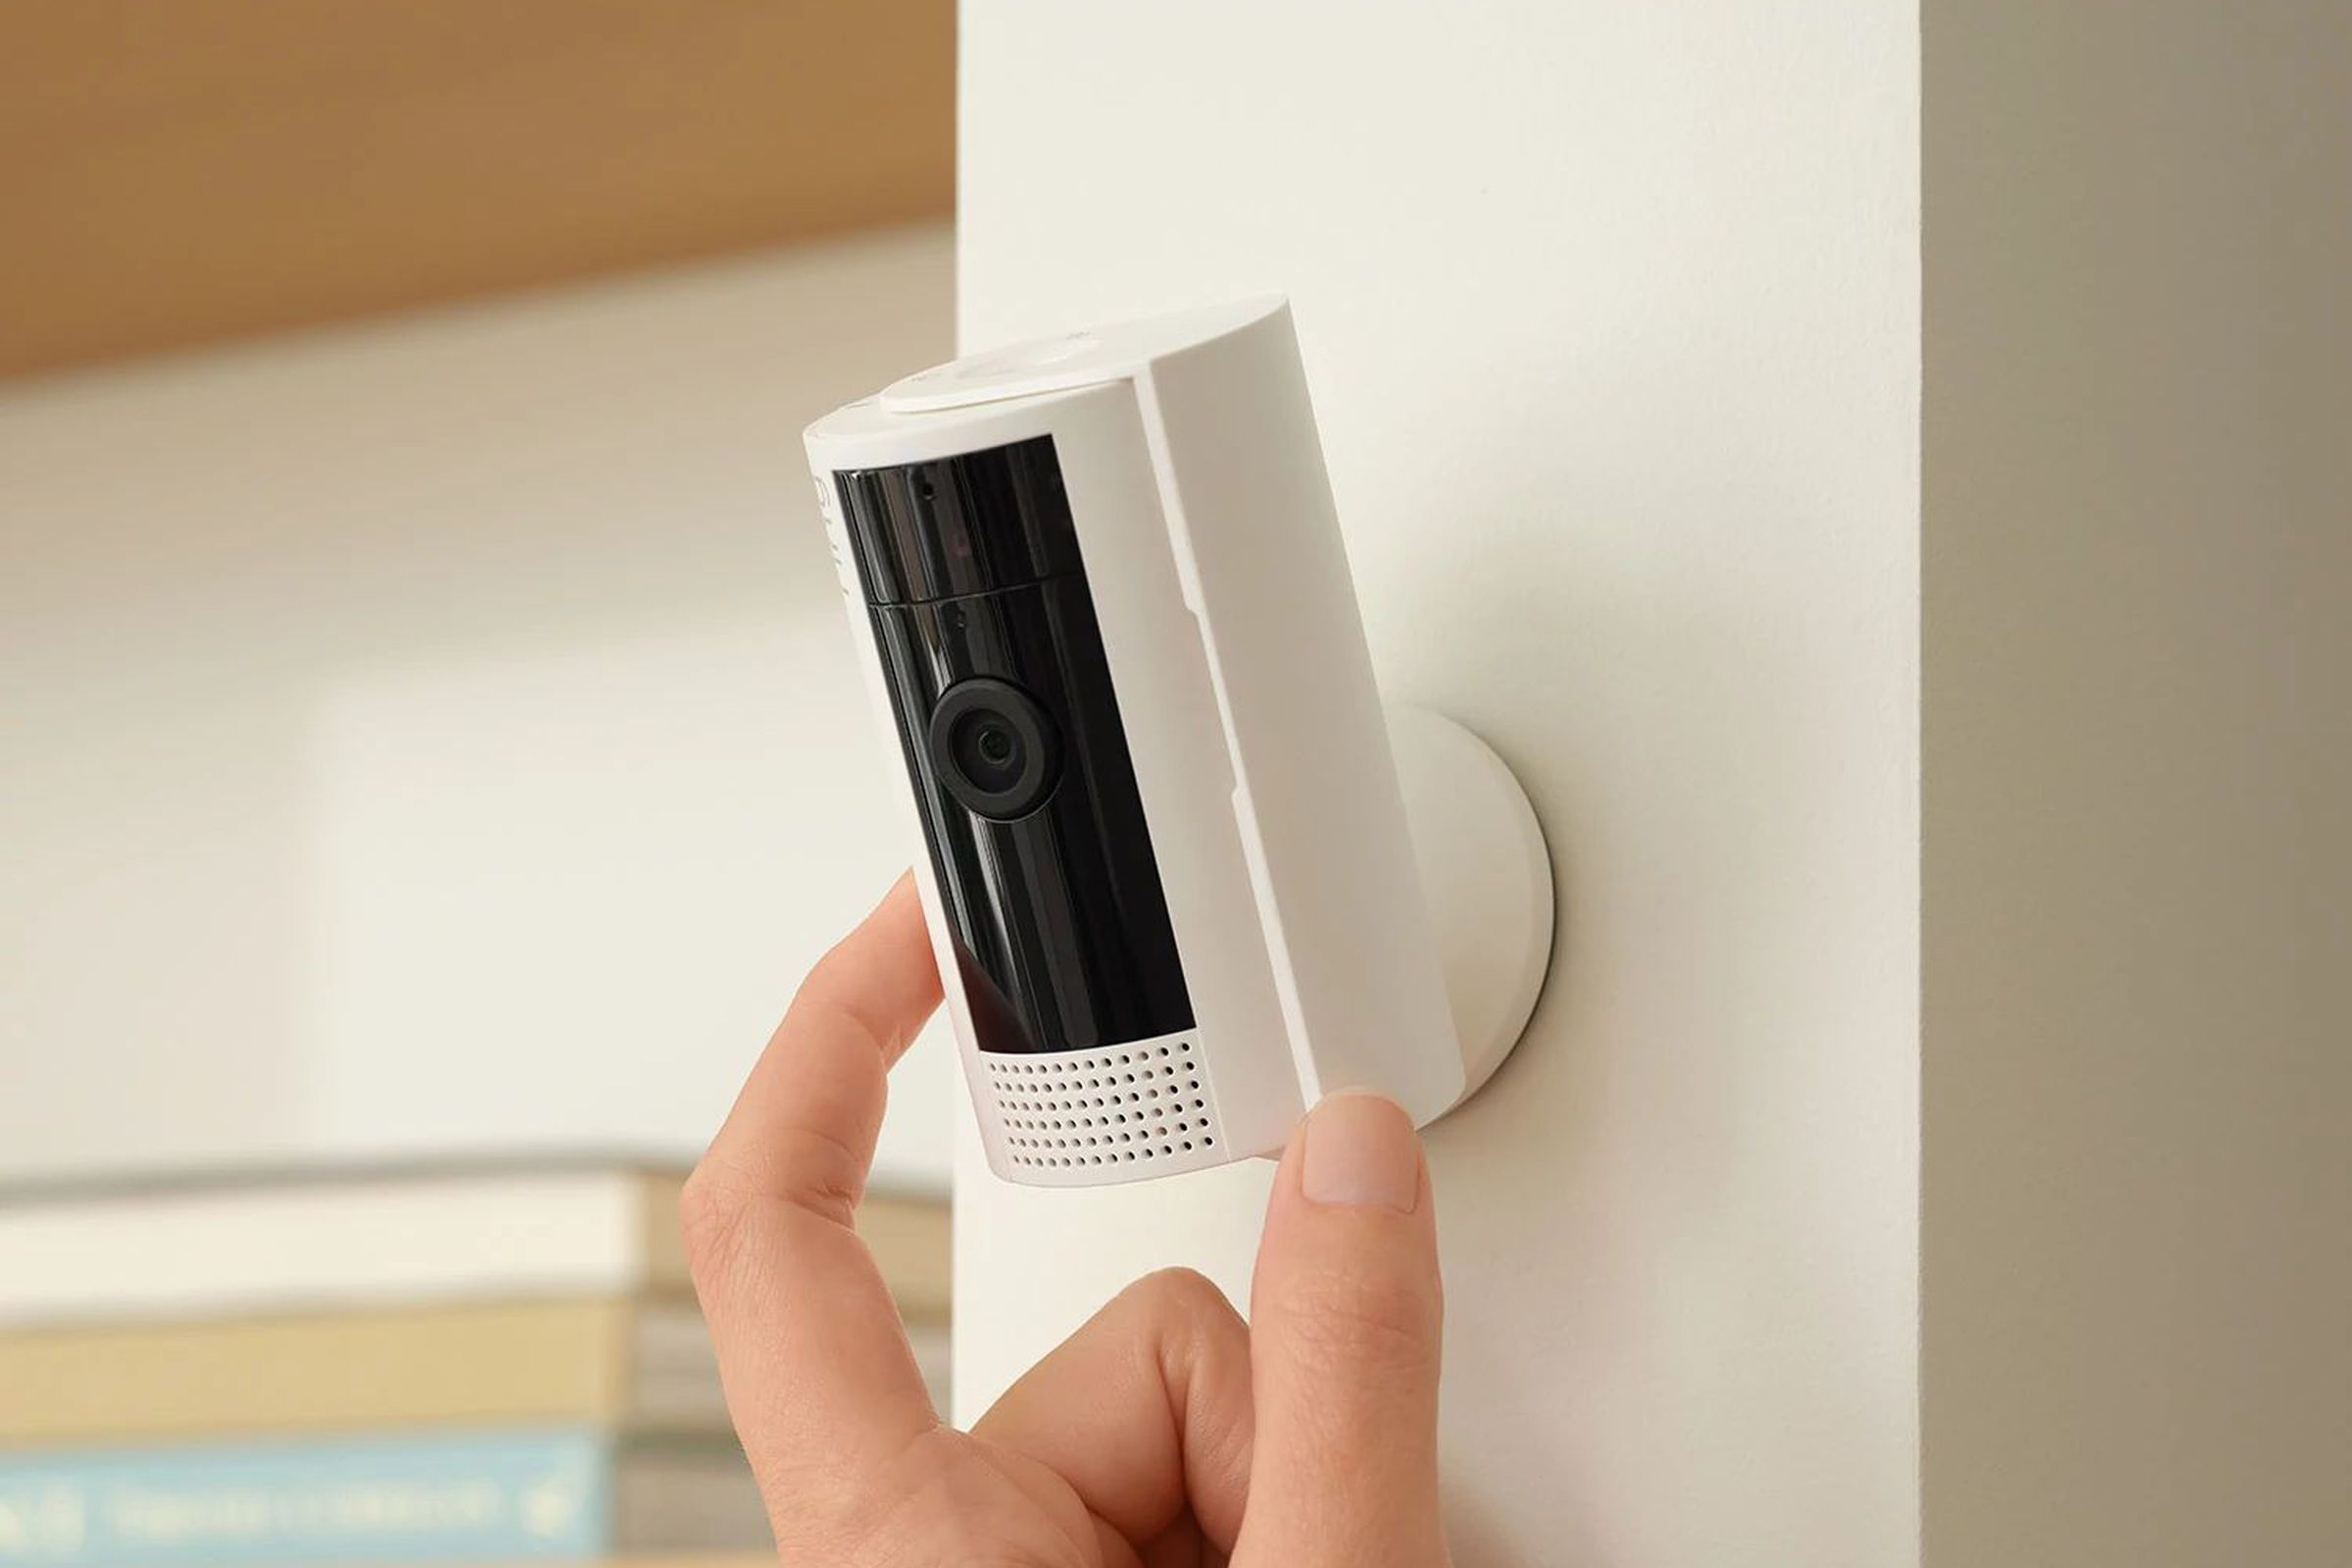 A white Ring security camera mounted on a wall with a hand adjusting it.